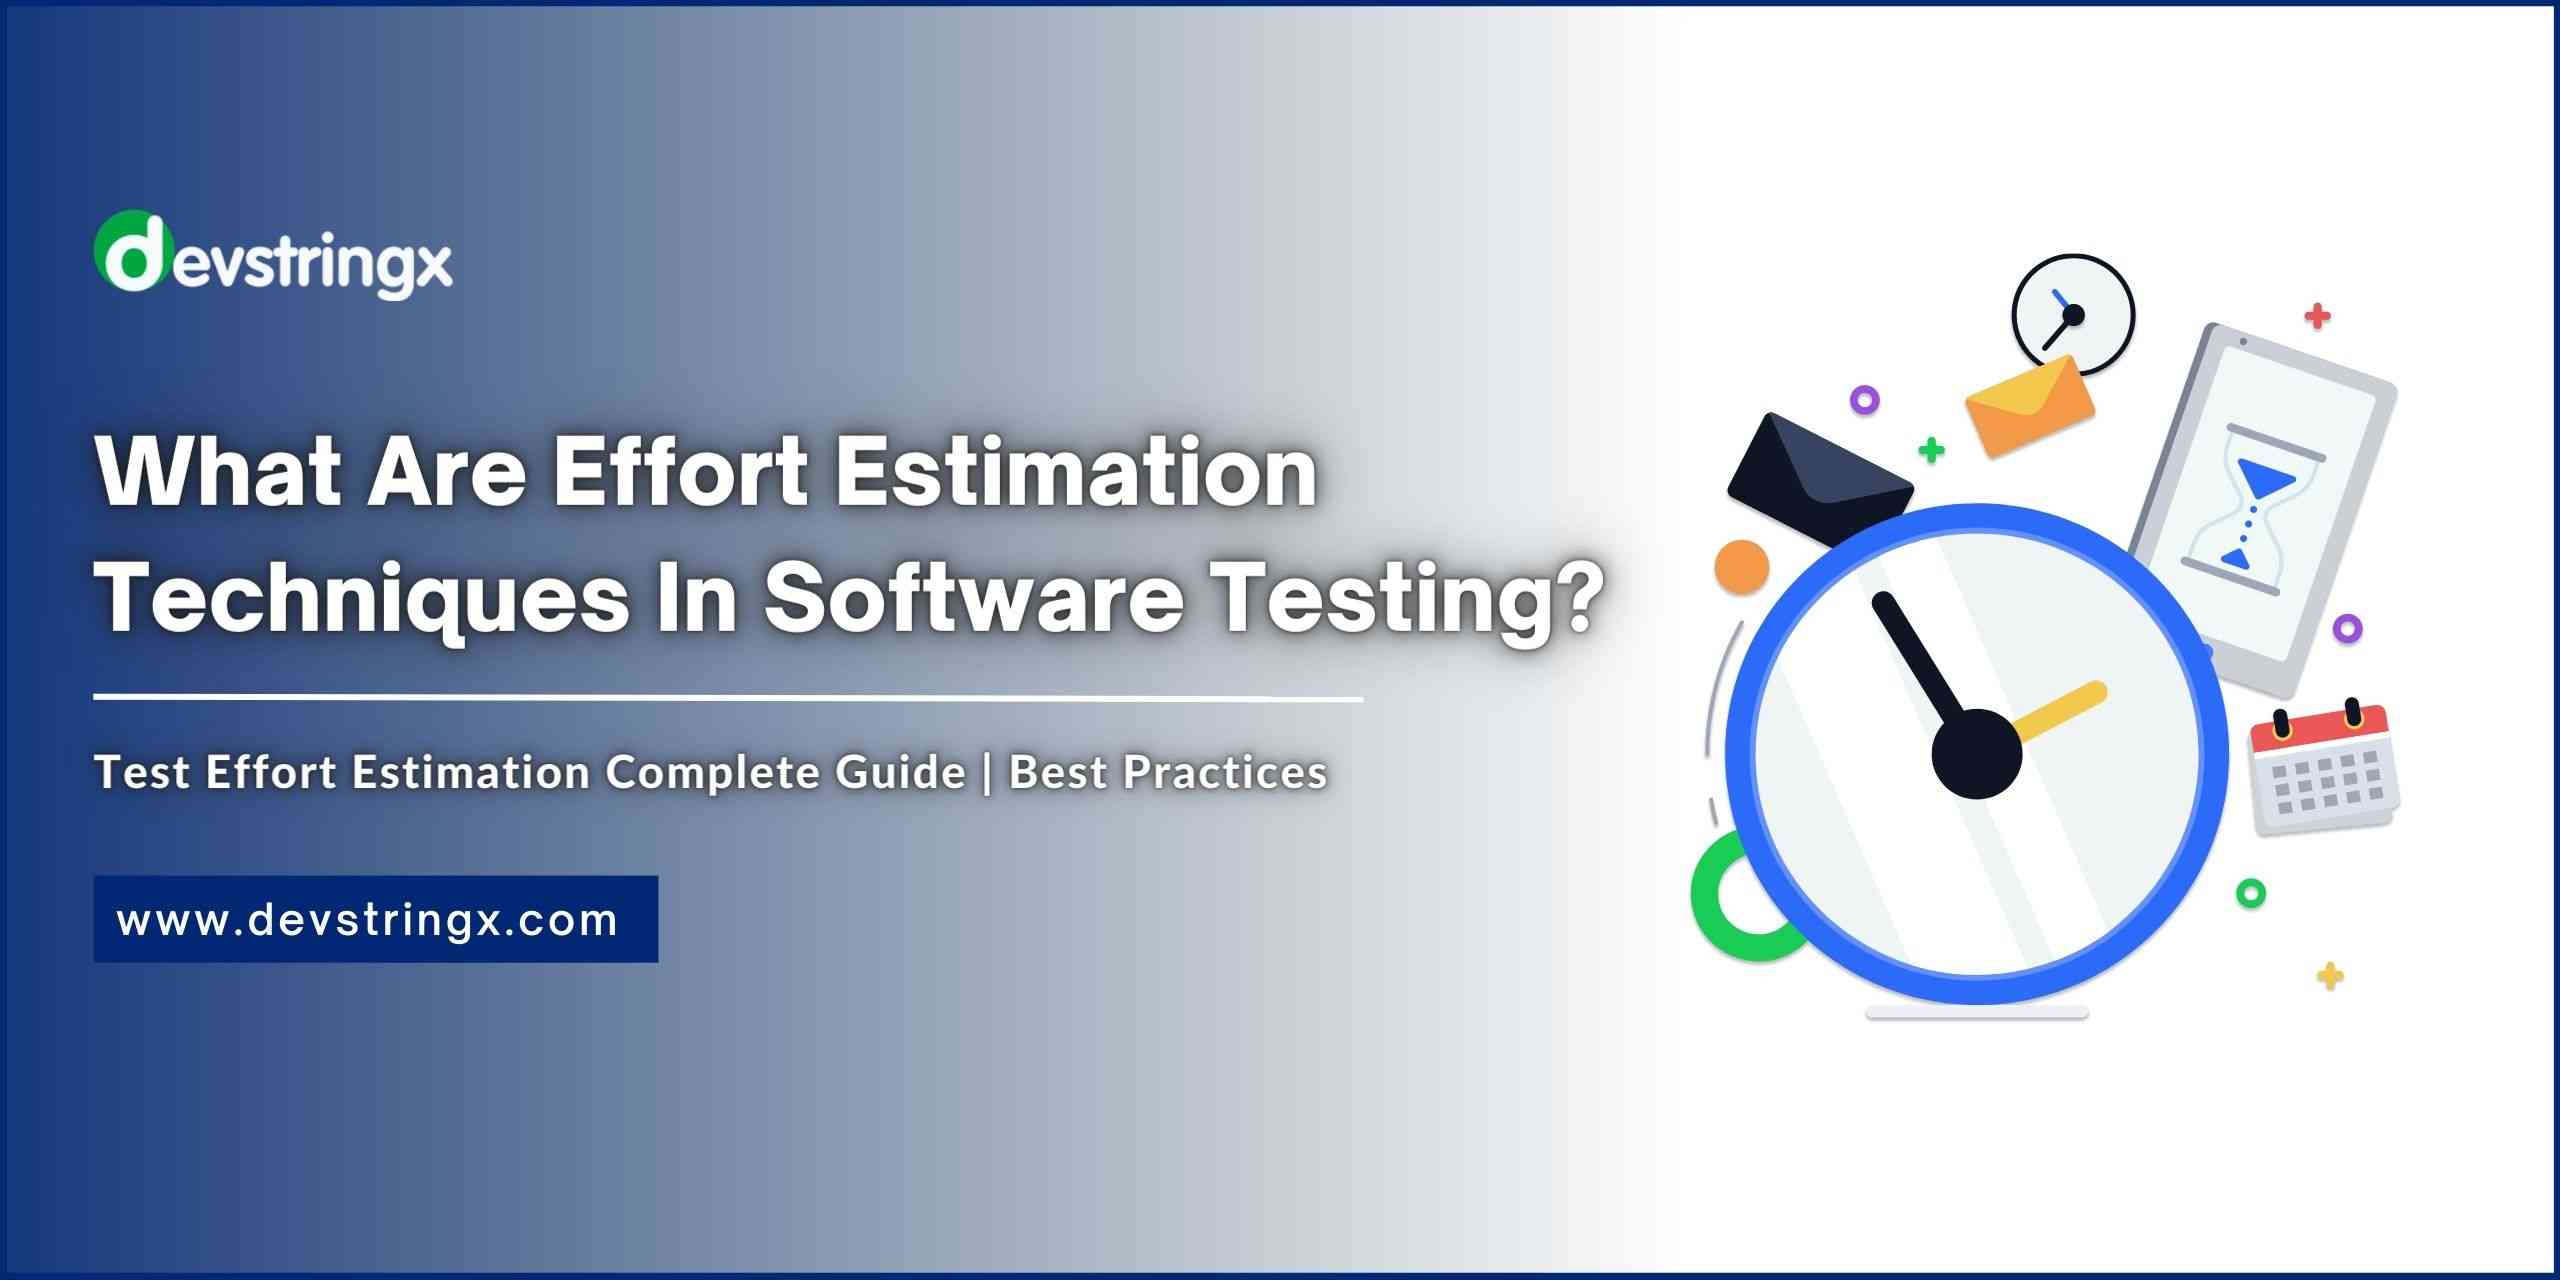 Feature image for Effort Estimation Techniques in Testing blog